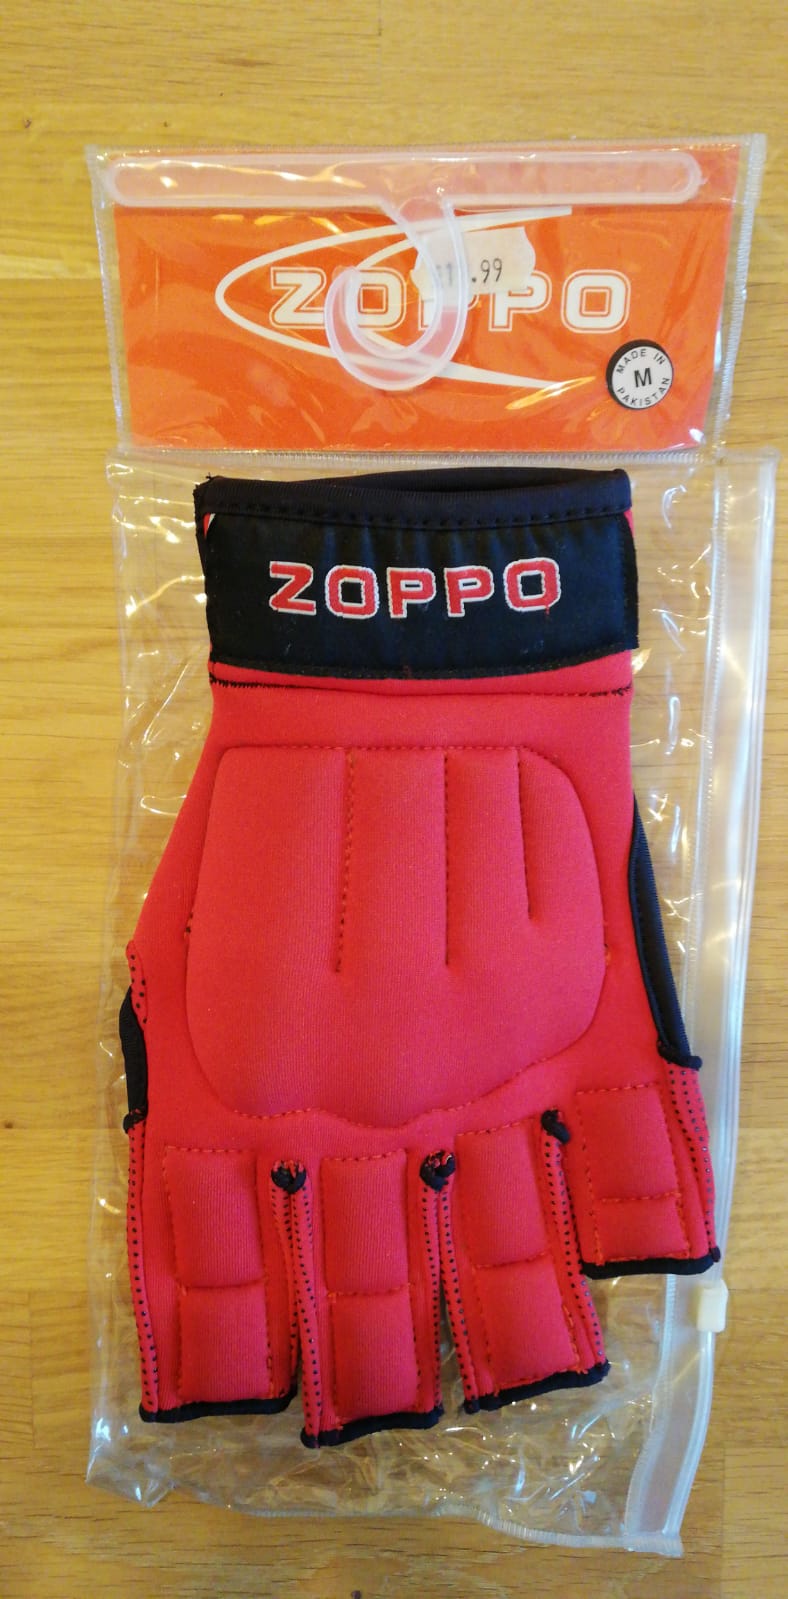 Zoppo Open Palm Protection Glove Red